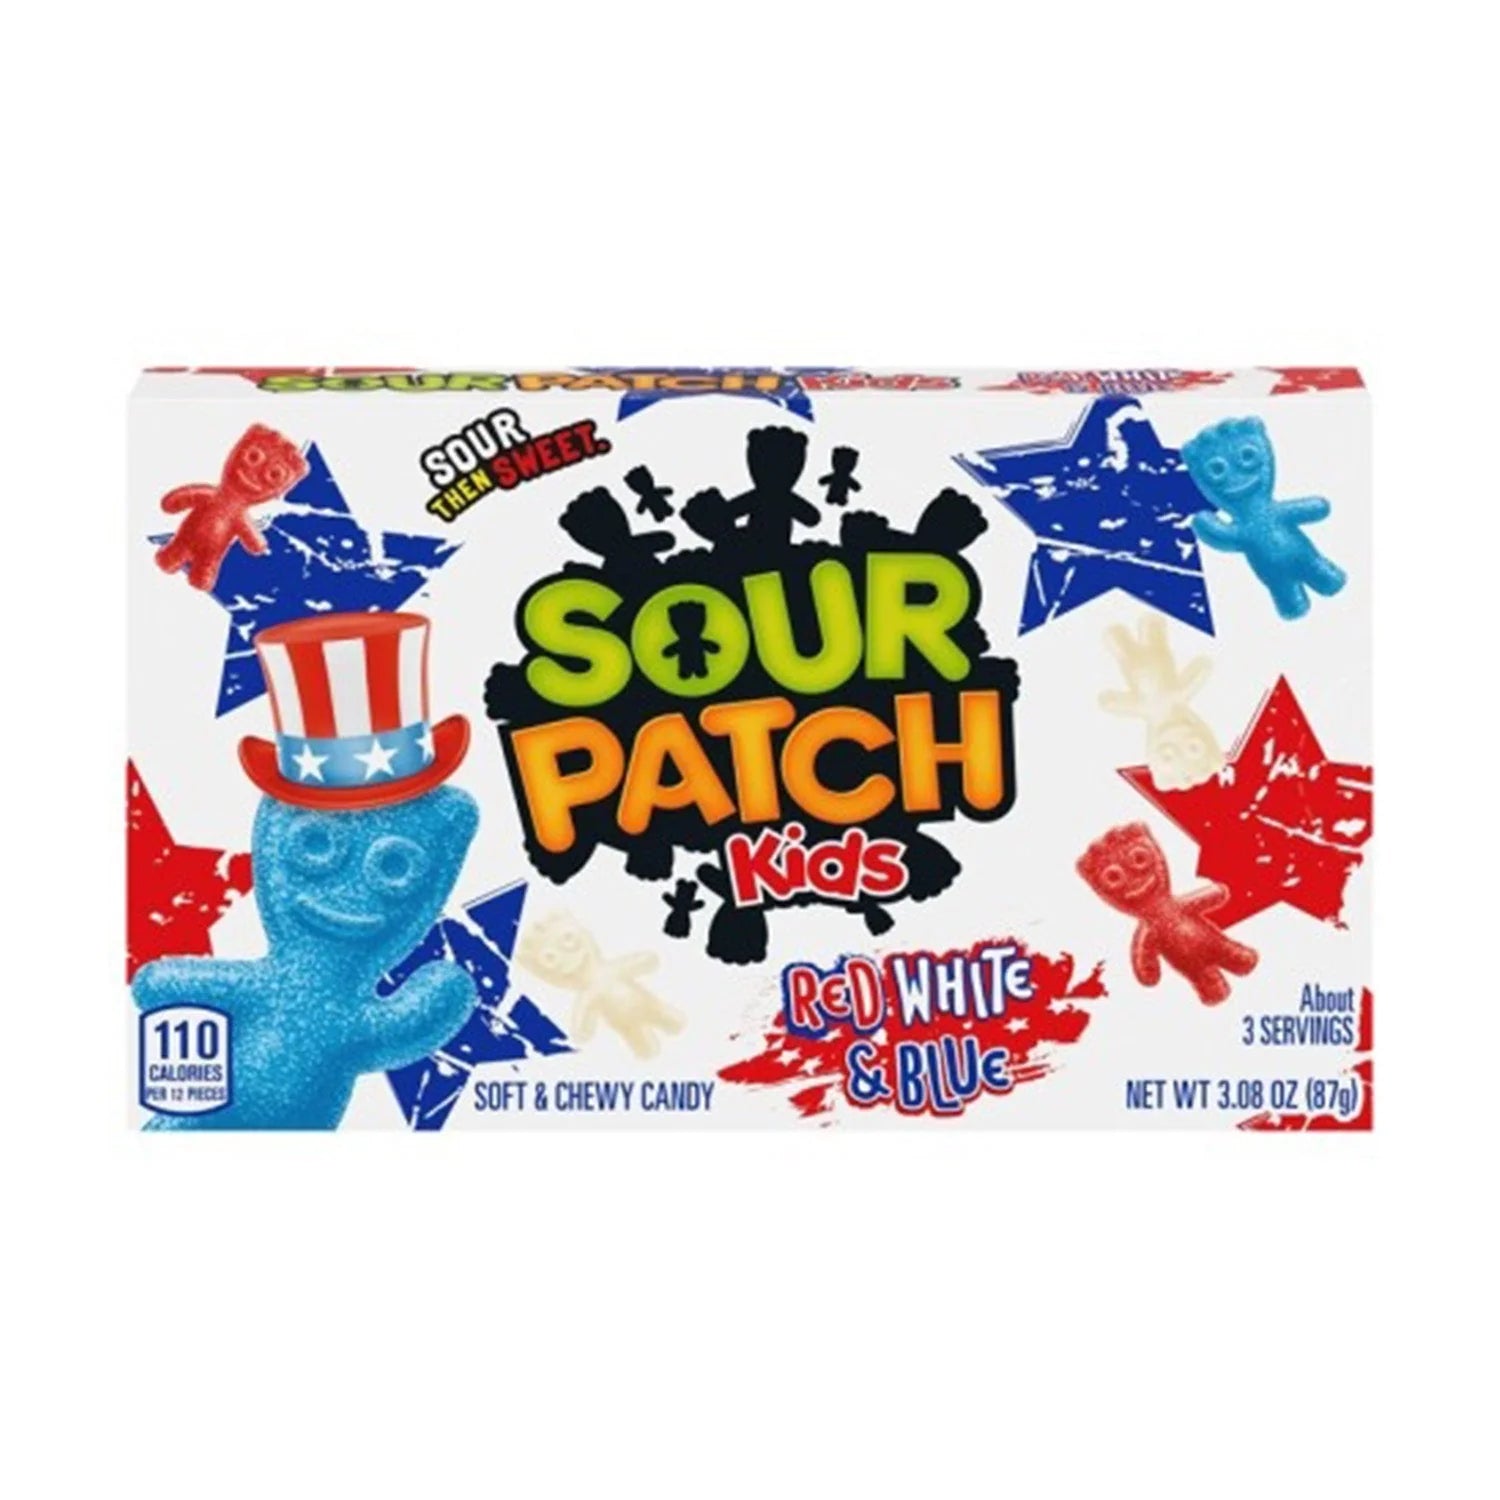 Sour Patch Kids Red White & Blue Edition